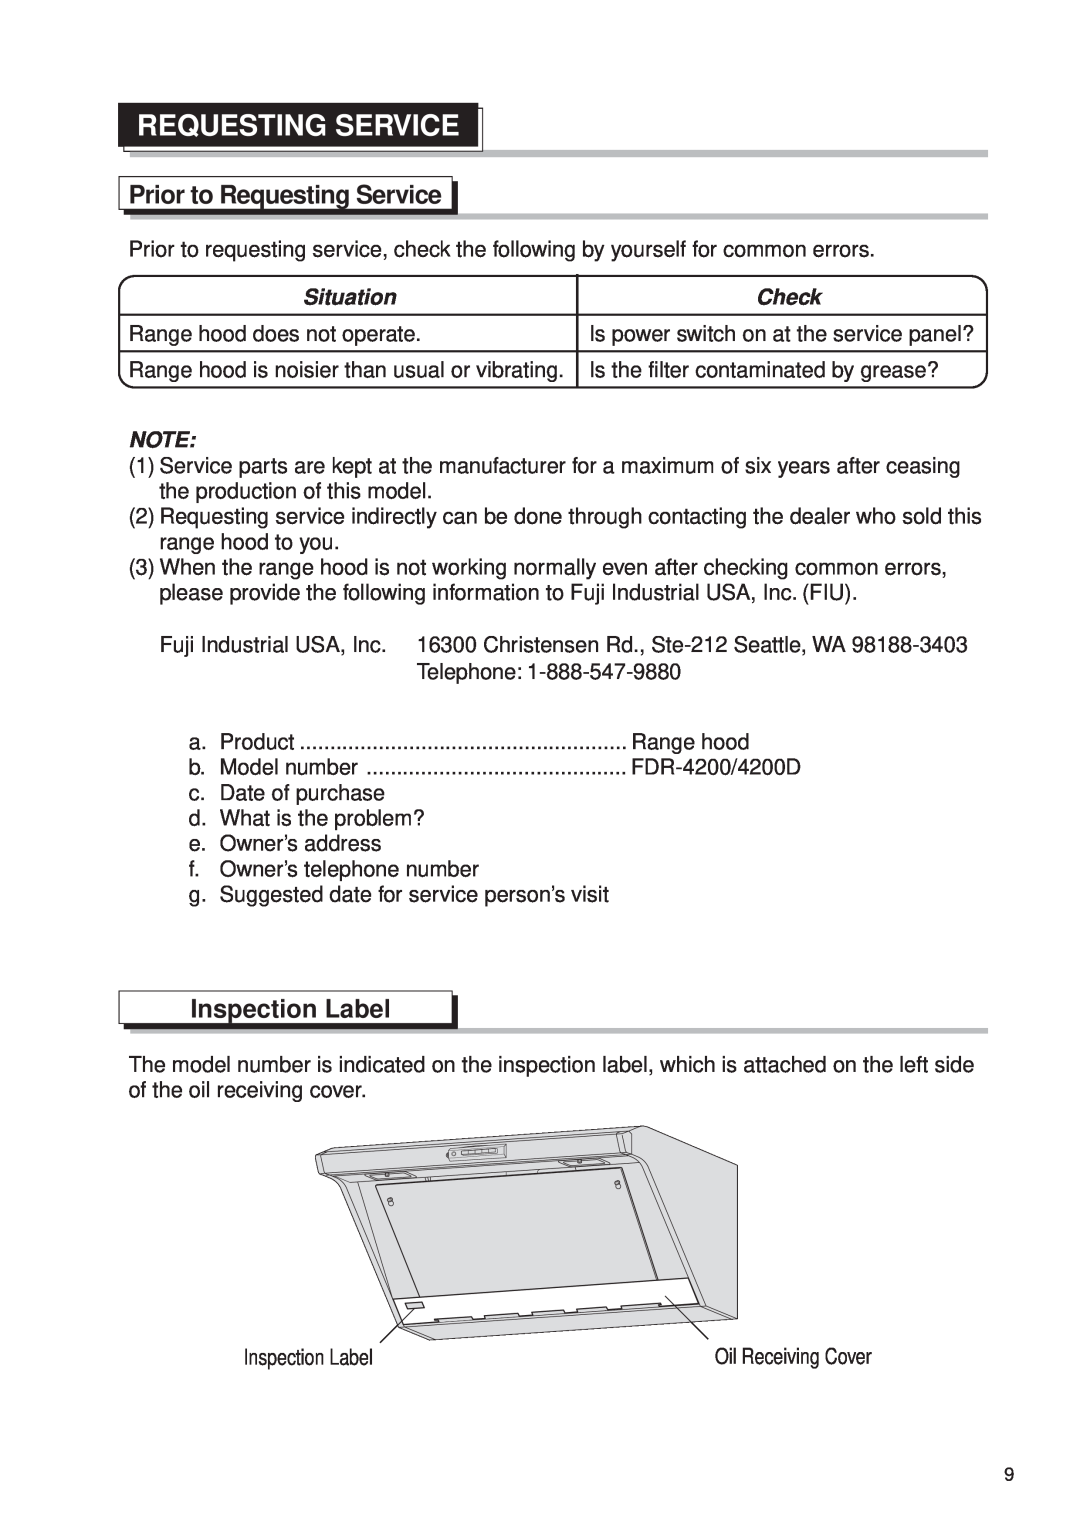 Fujioh FDR-4200D operation manual Prior to Requesting Service, Inspection Label, Situation, Check 